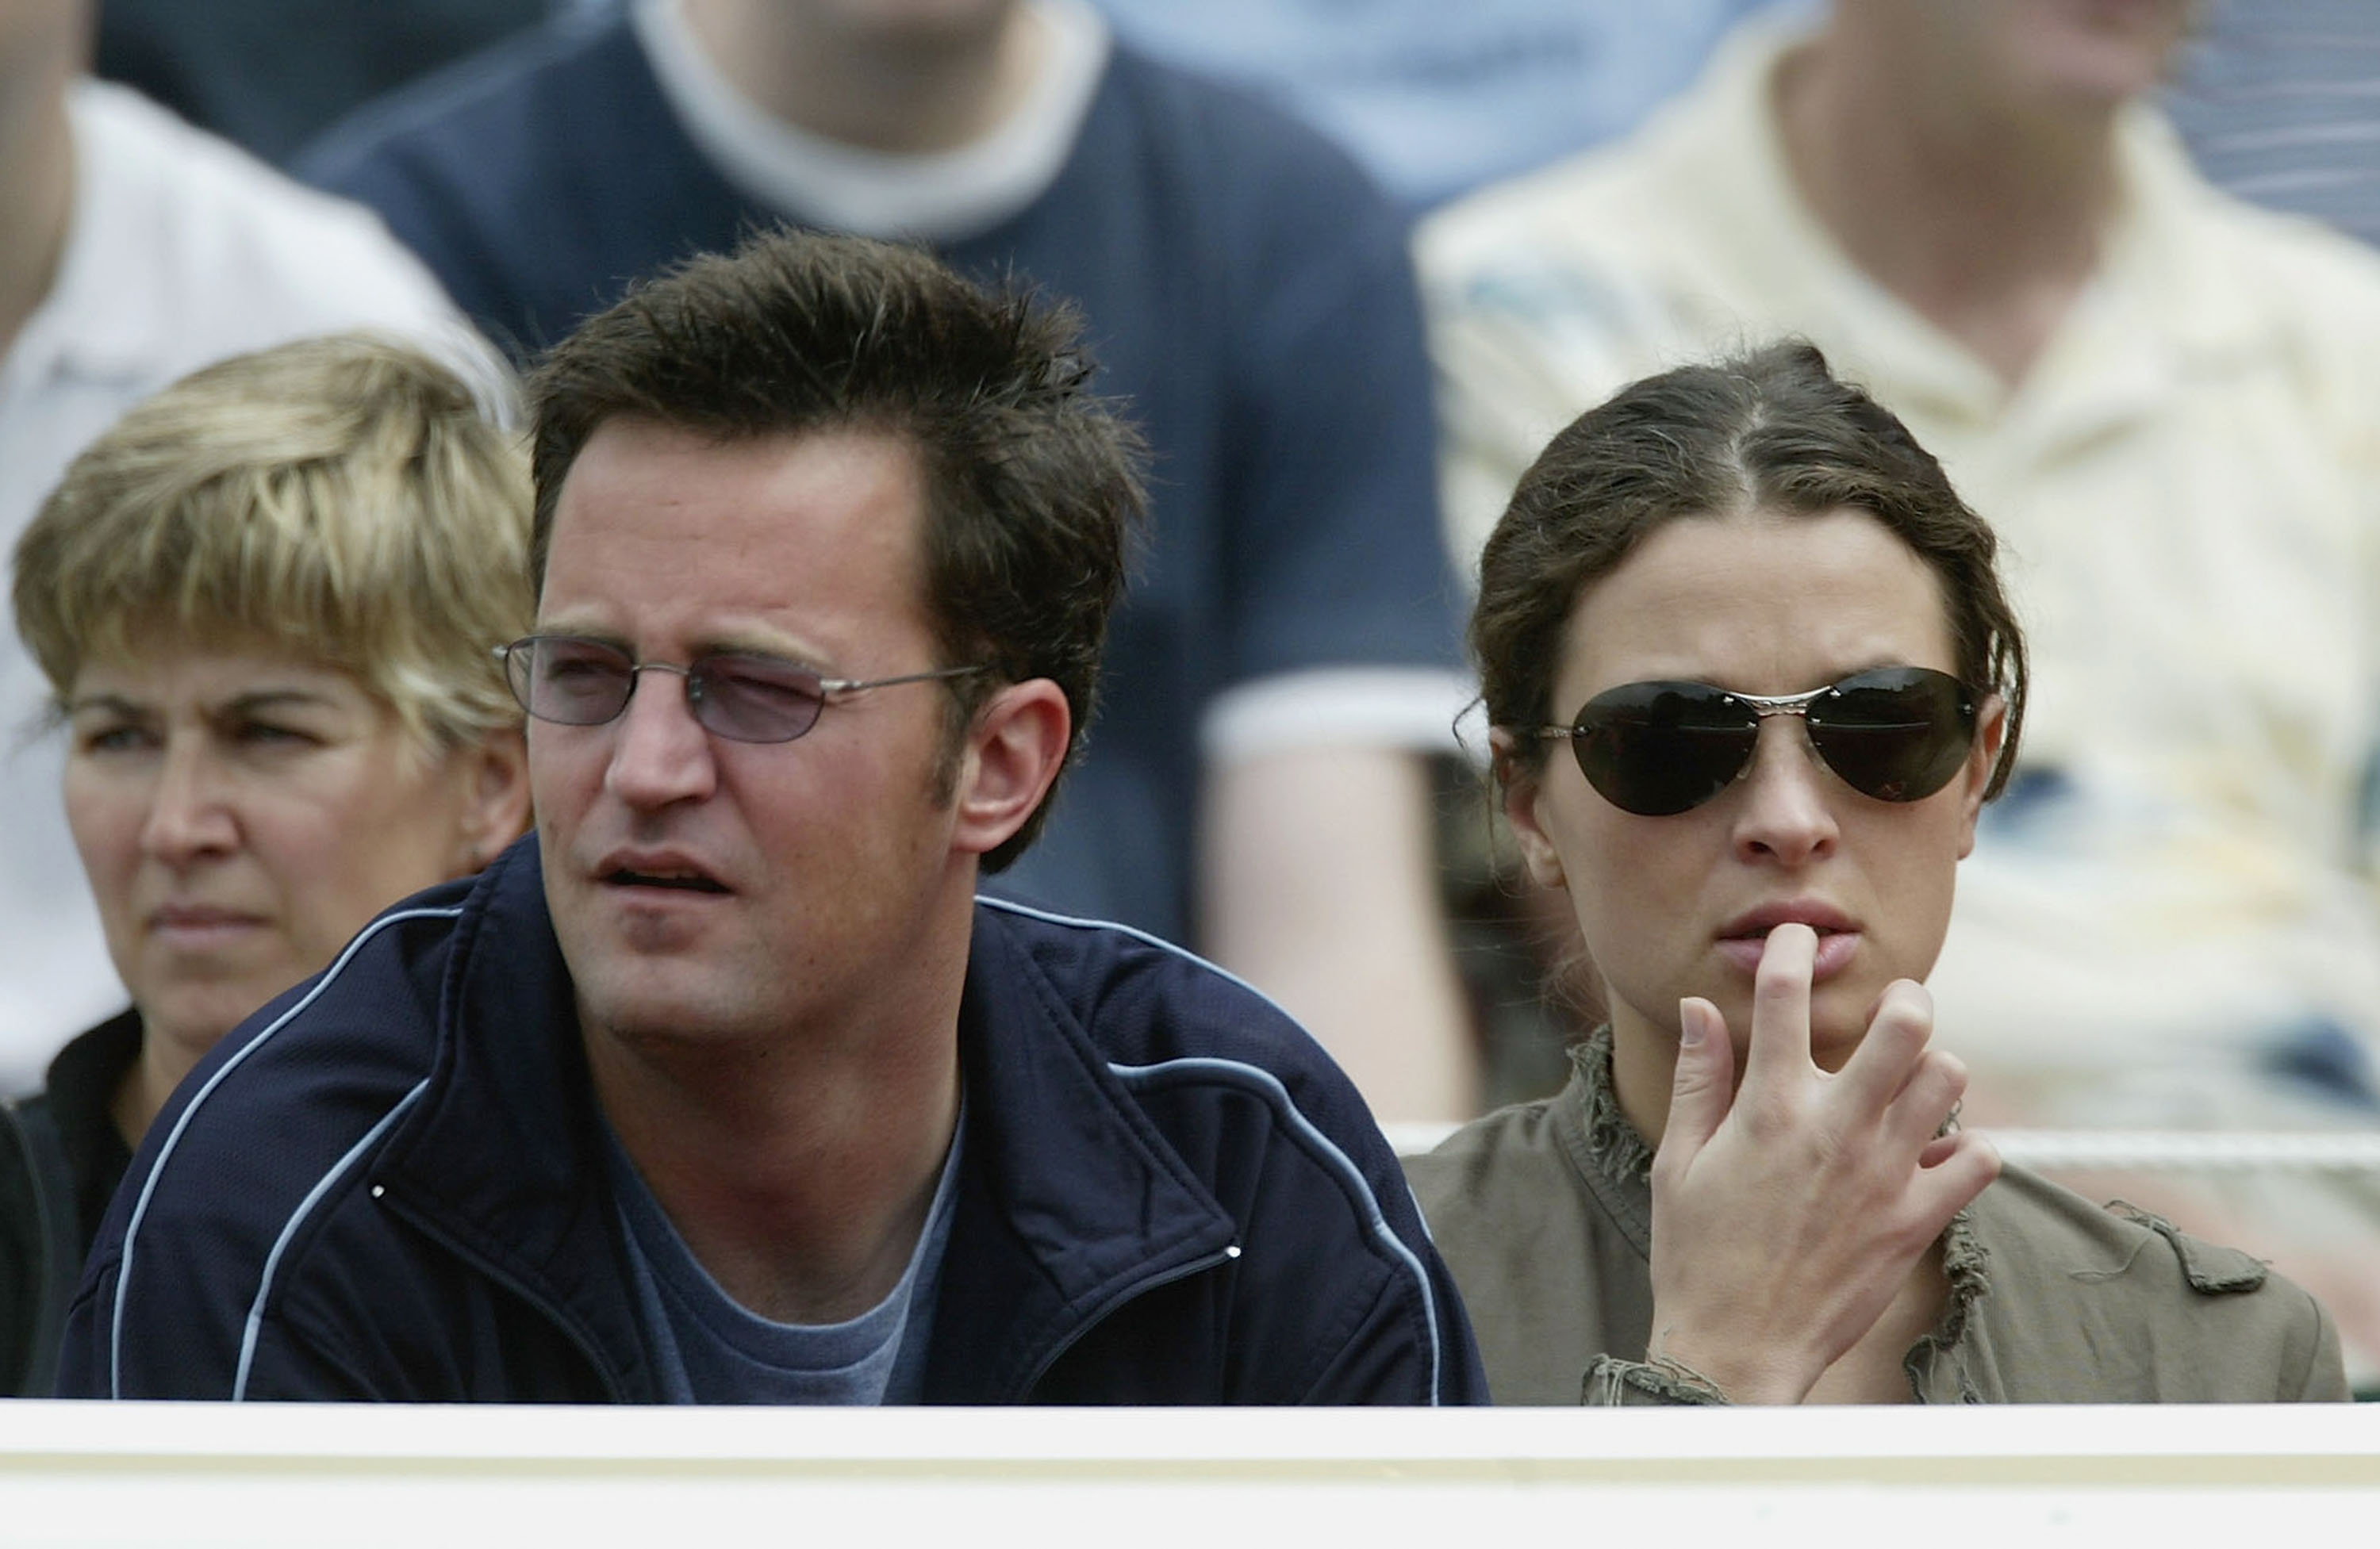 Matthew Perry and Rachel Dunn watching a match on June 10, 2003 in London, England | Source: Getty Images